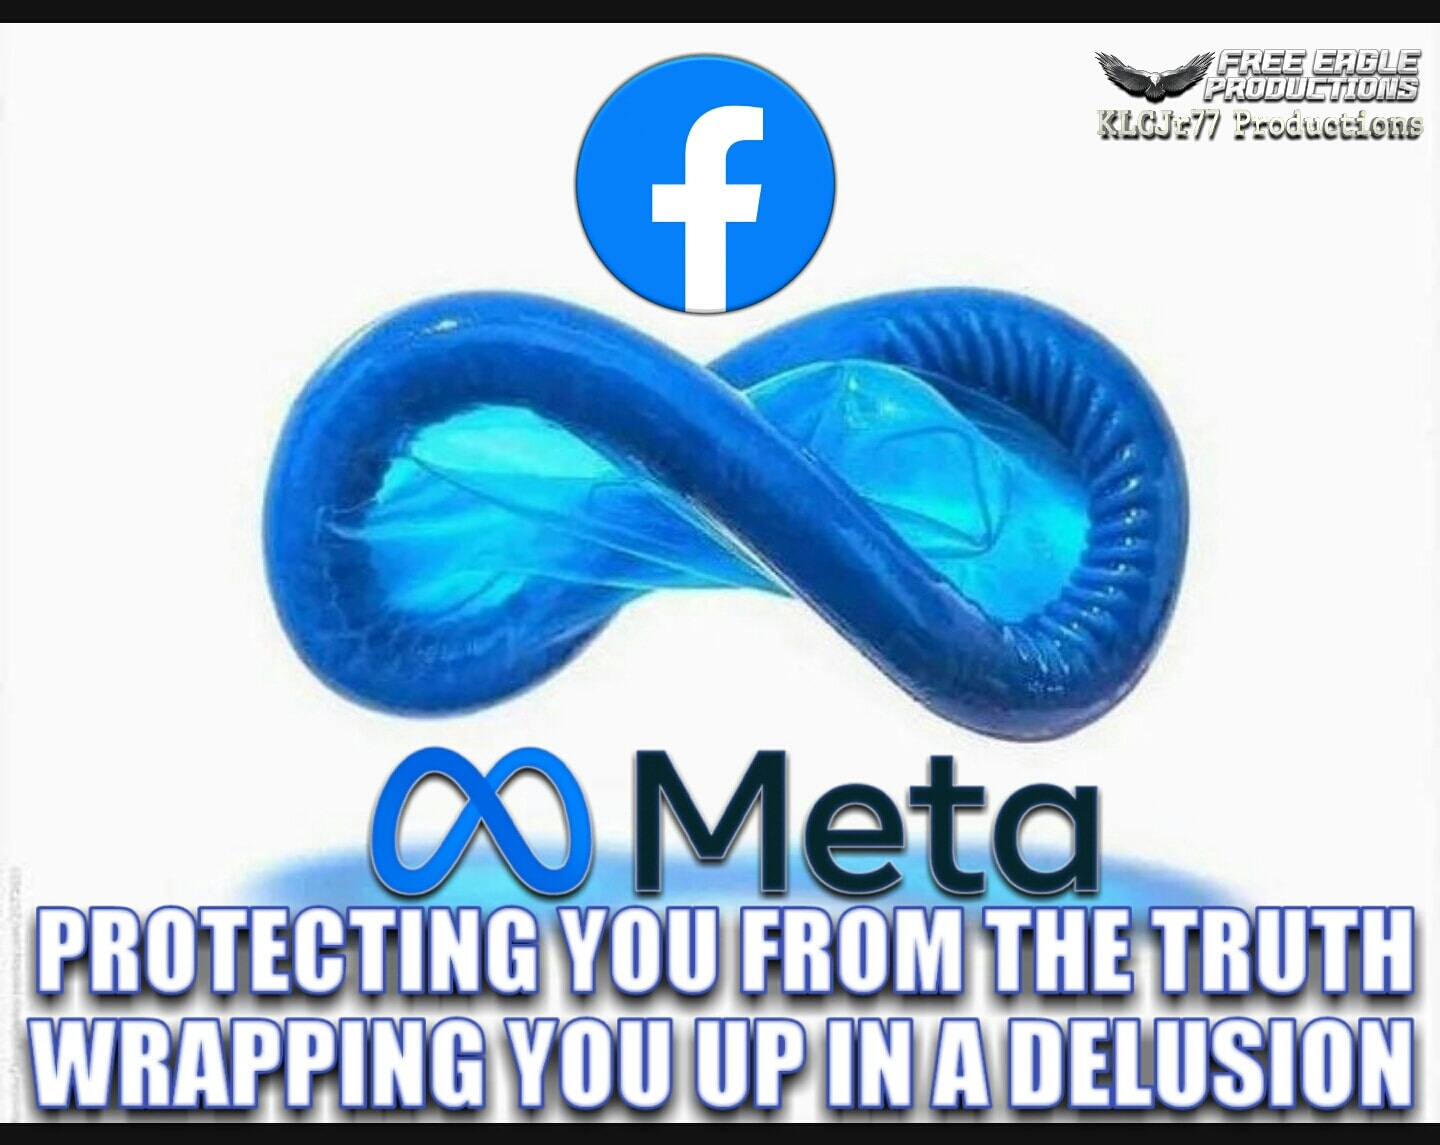 May be an image of text that says 'FREE ERGLE PRODUCTIONS KLCJ-77 Productions f 0Meta PROTECTING YOU FROM THE TRUTH WRAPPING YOU UP IN A DELUSION'